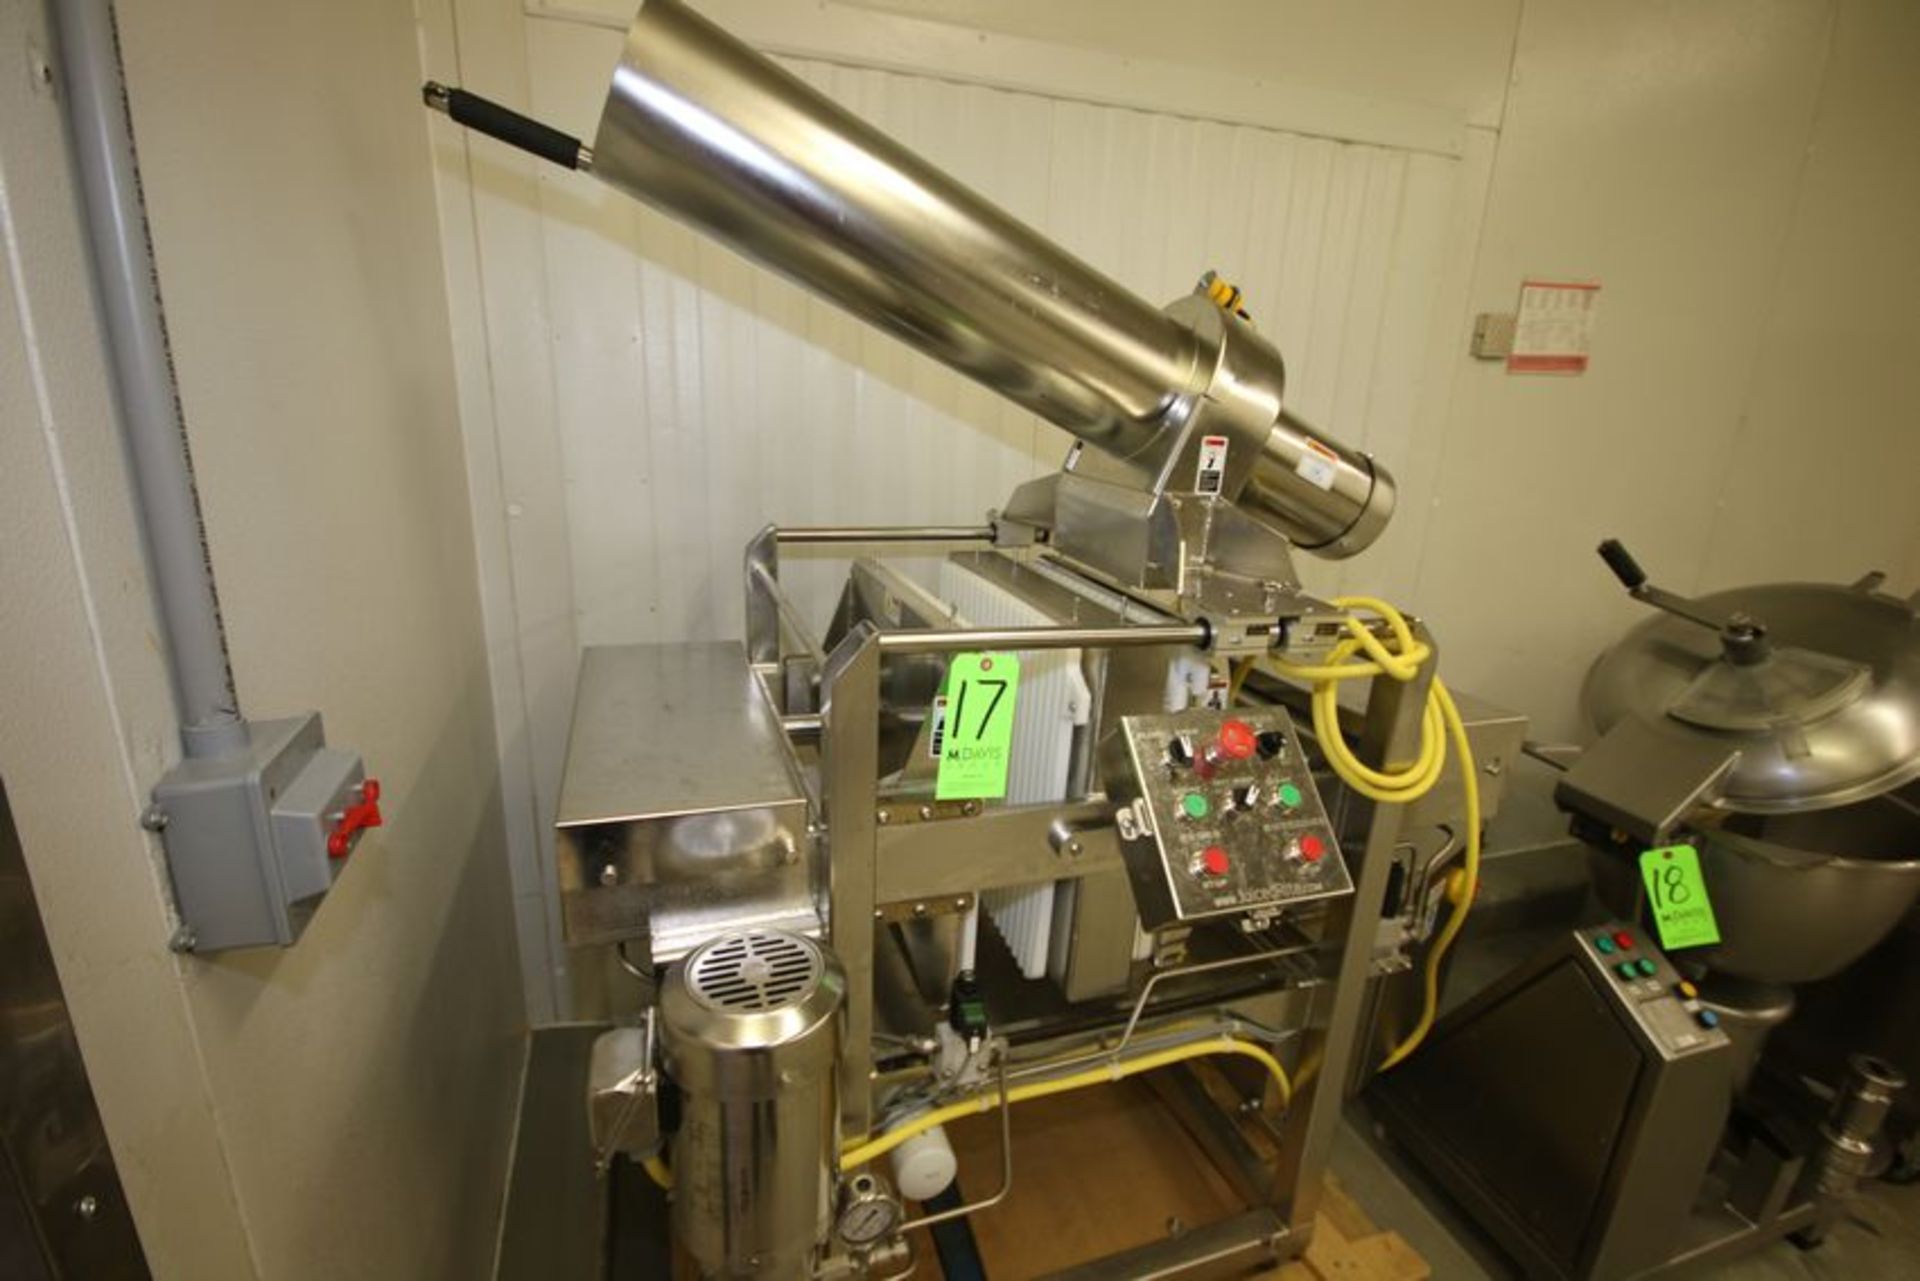 Juiced Rite Cold Press Juicer, Model 900-00XH, S/N 0121602 with 2 hp S/S Clad Drive Motor, 208-230/ - Image 2 of 5